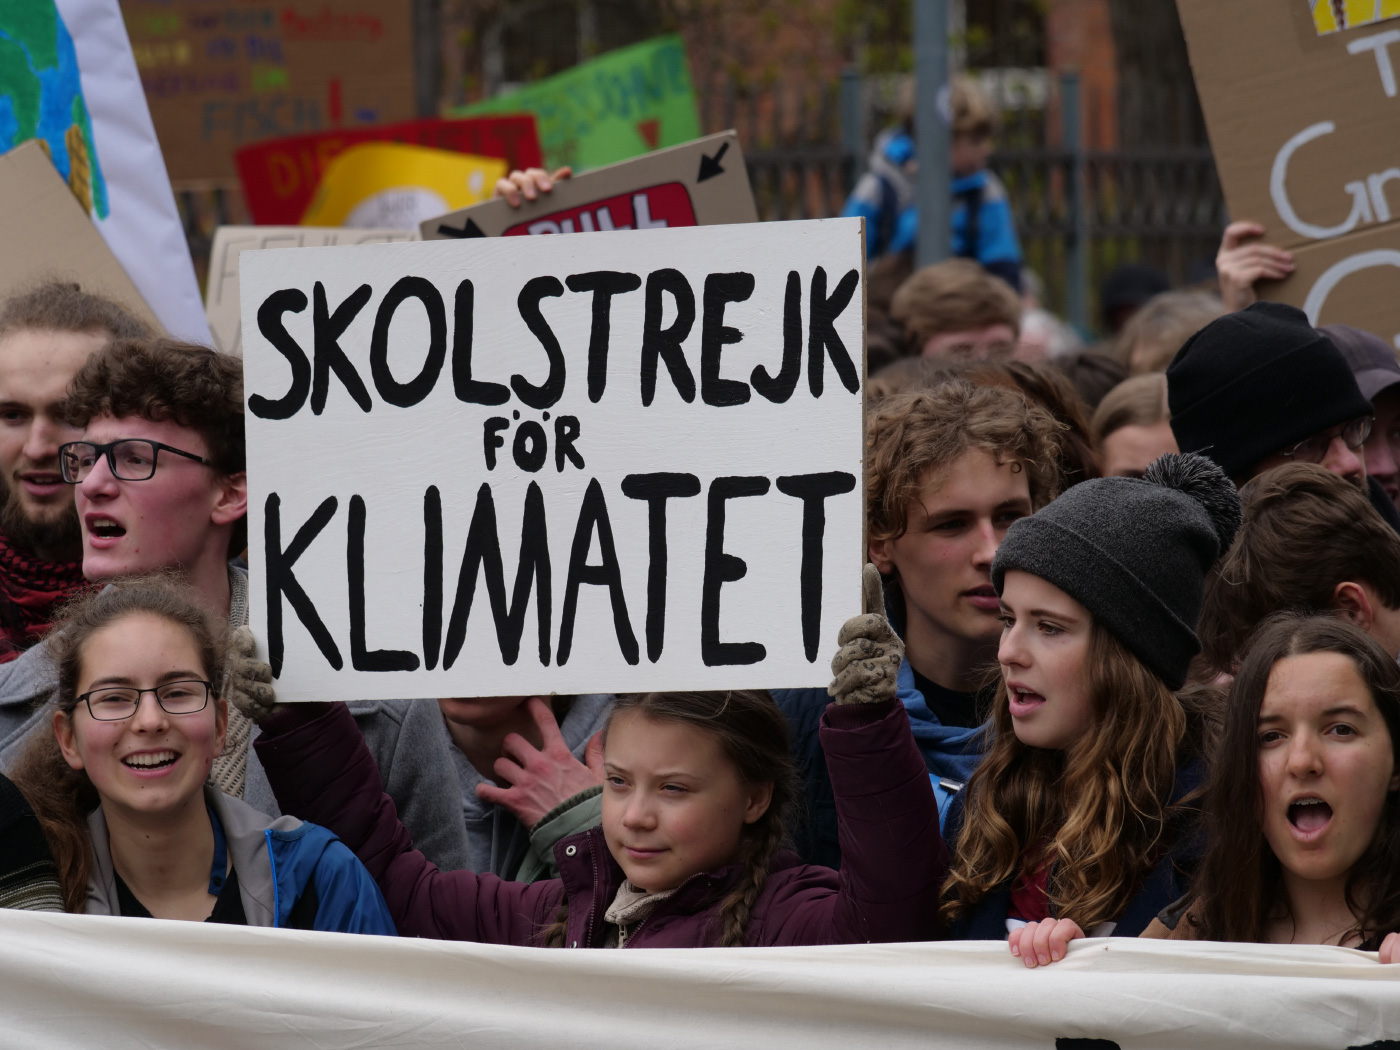 Greta Thunberg holding a sign advocating for climate action, in anticipation of the Global Climate Strike